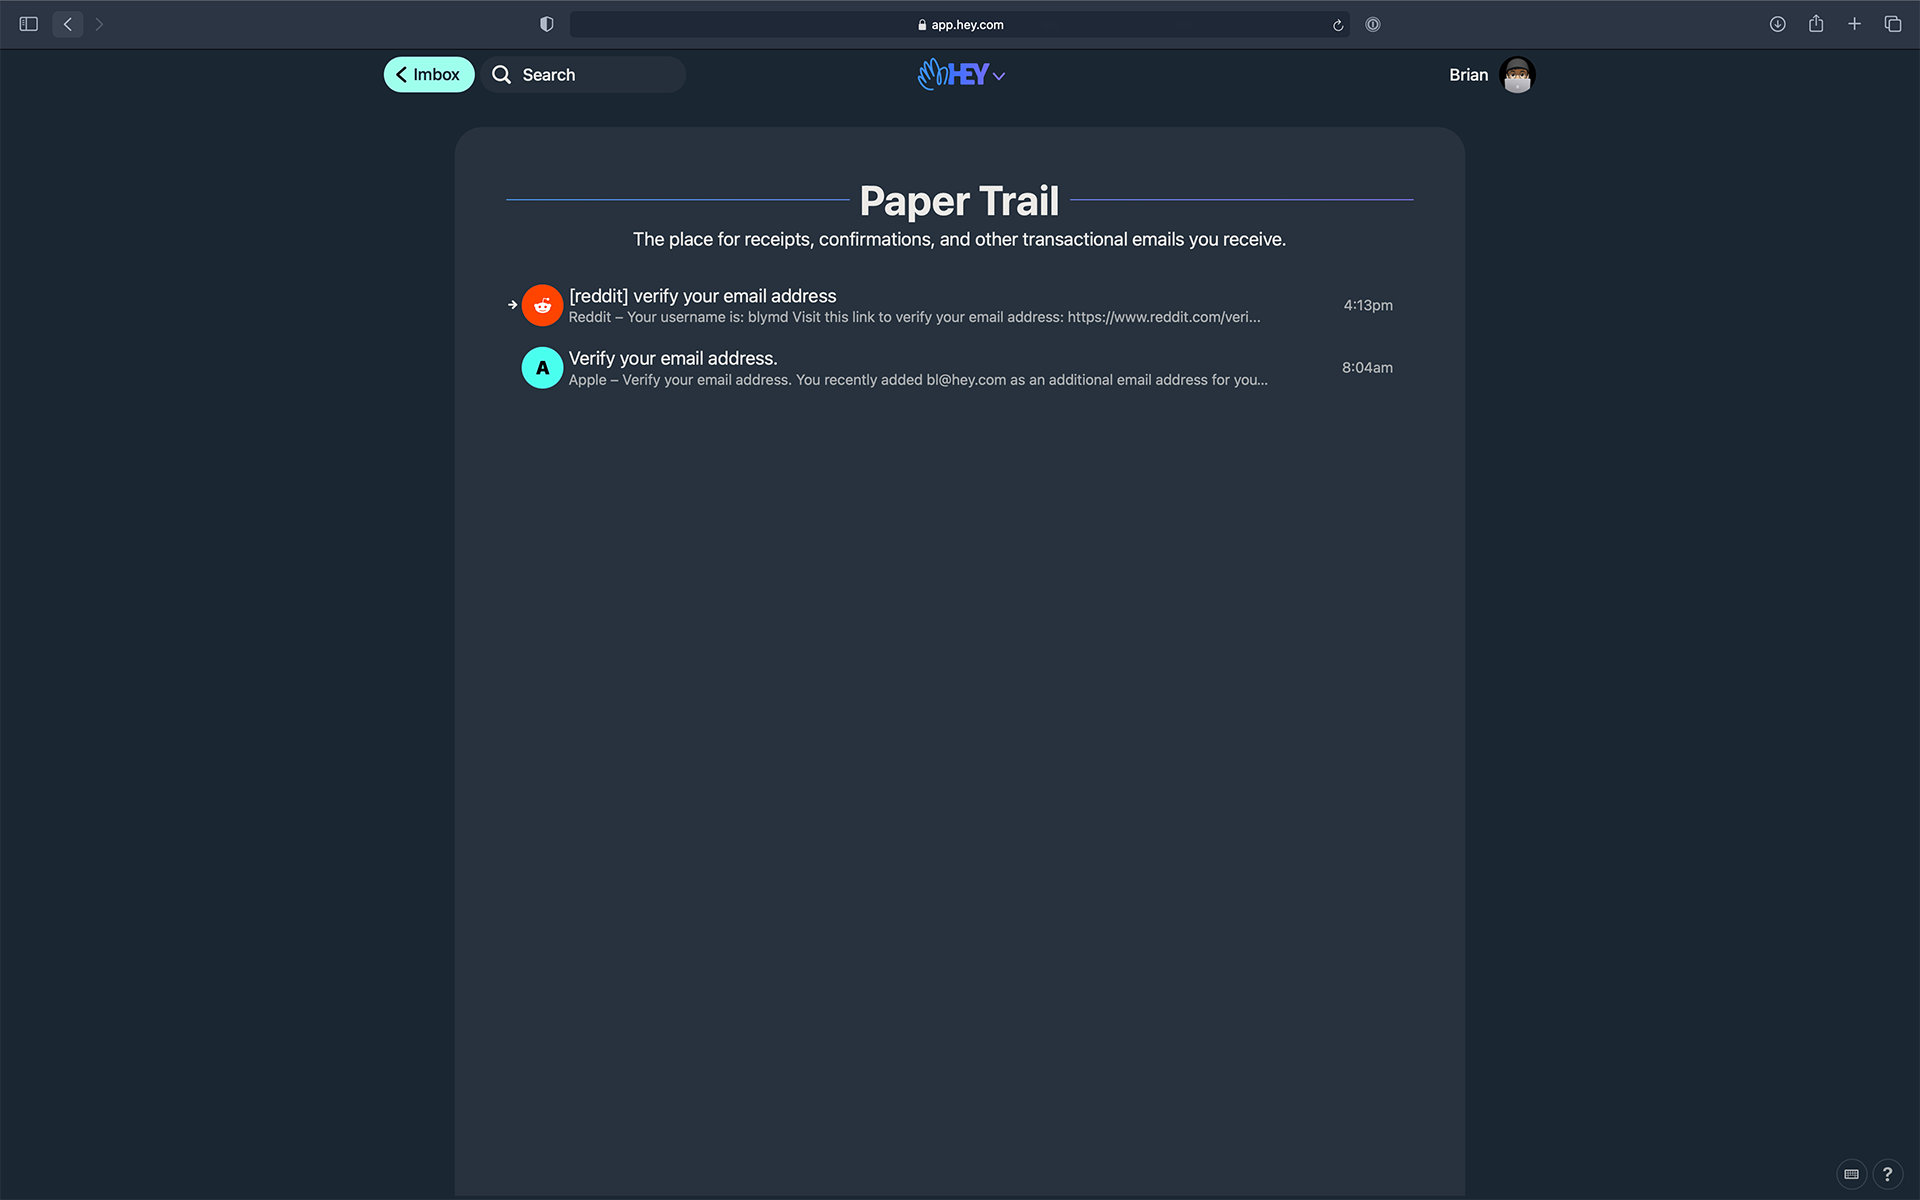 HEY's Paper Trail for receipts and transactional emails.